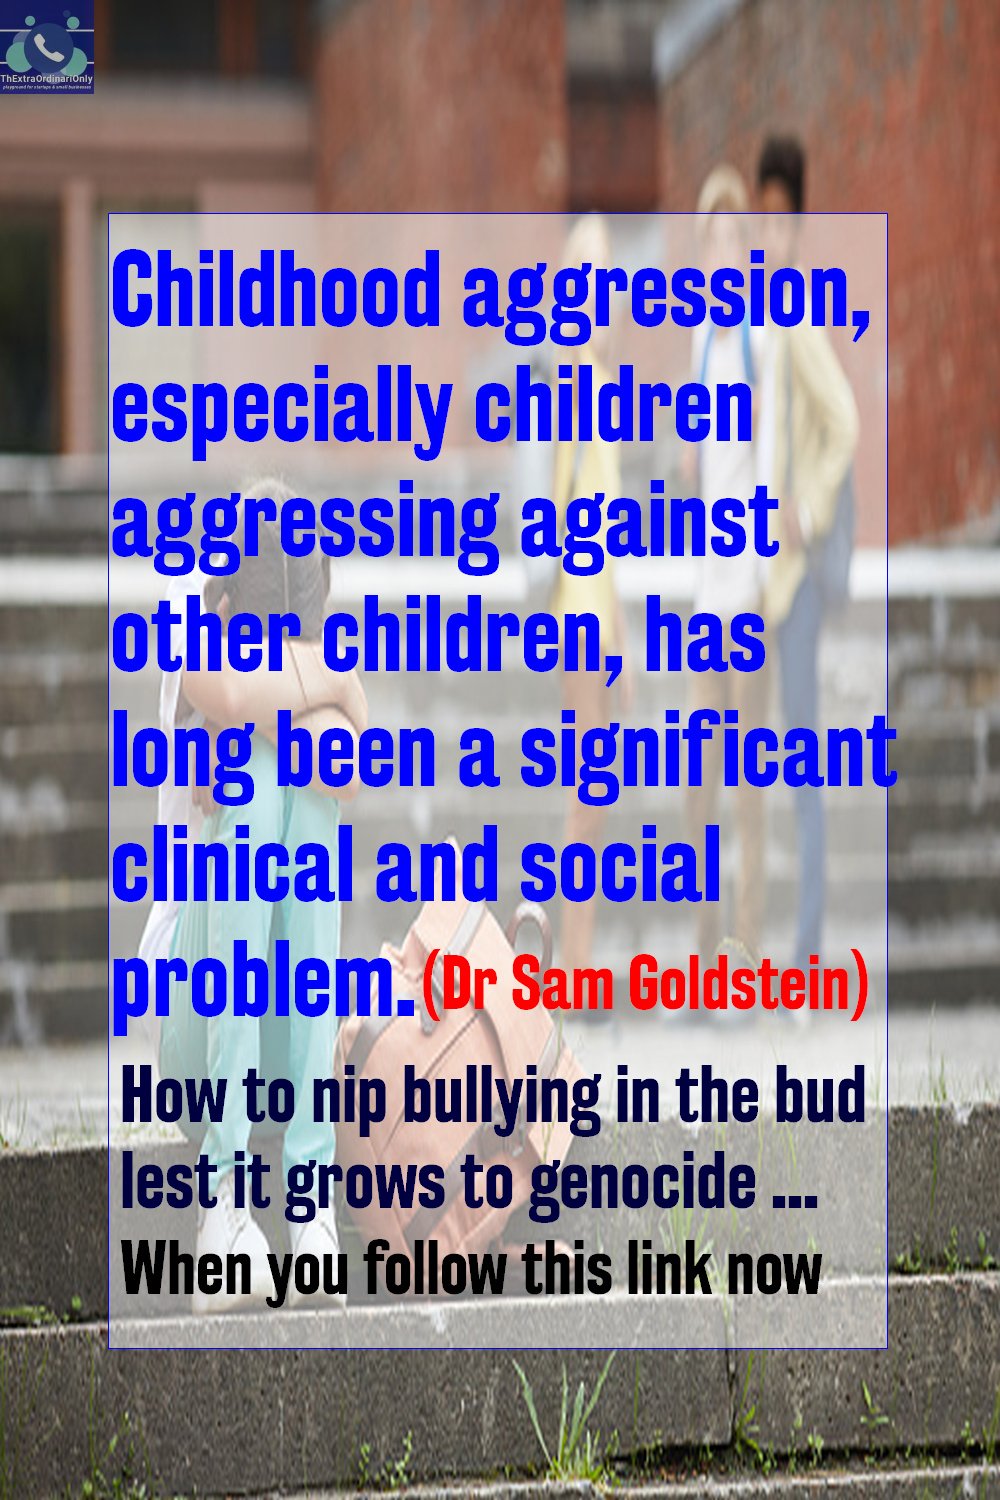 the science of bullying - how to nip bullying in the bud lest it grows to genocide